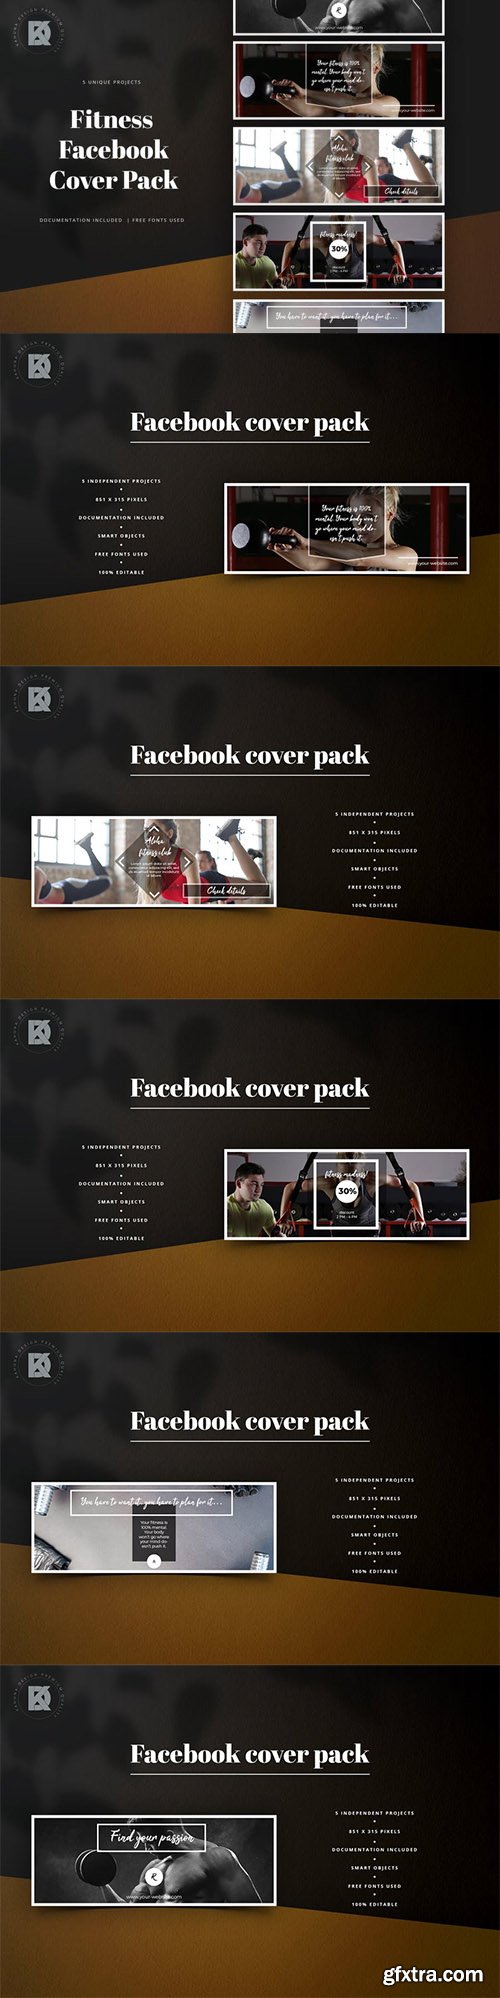 Fitness Facebook Cover Pack